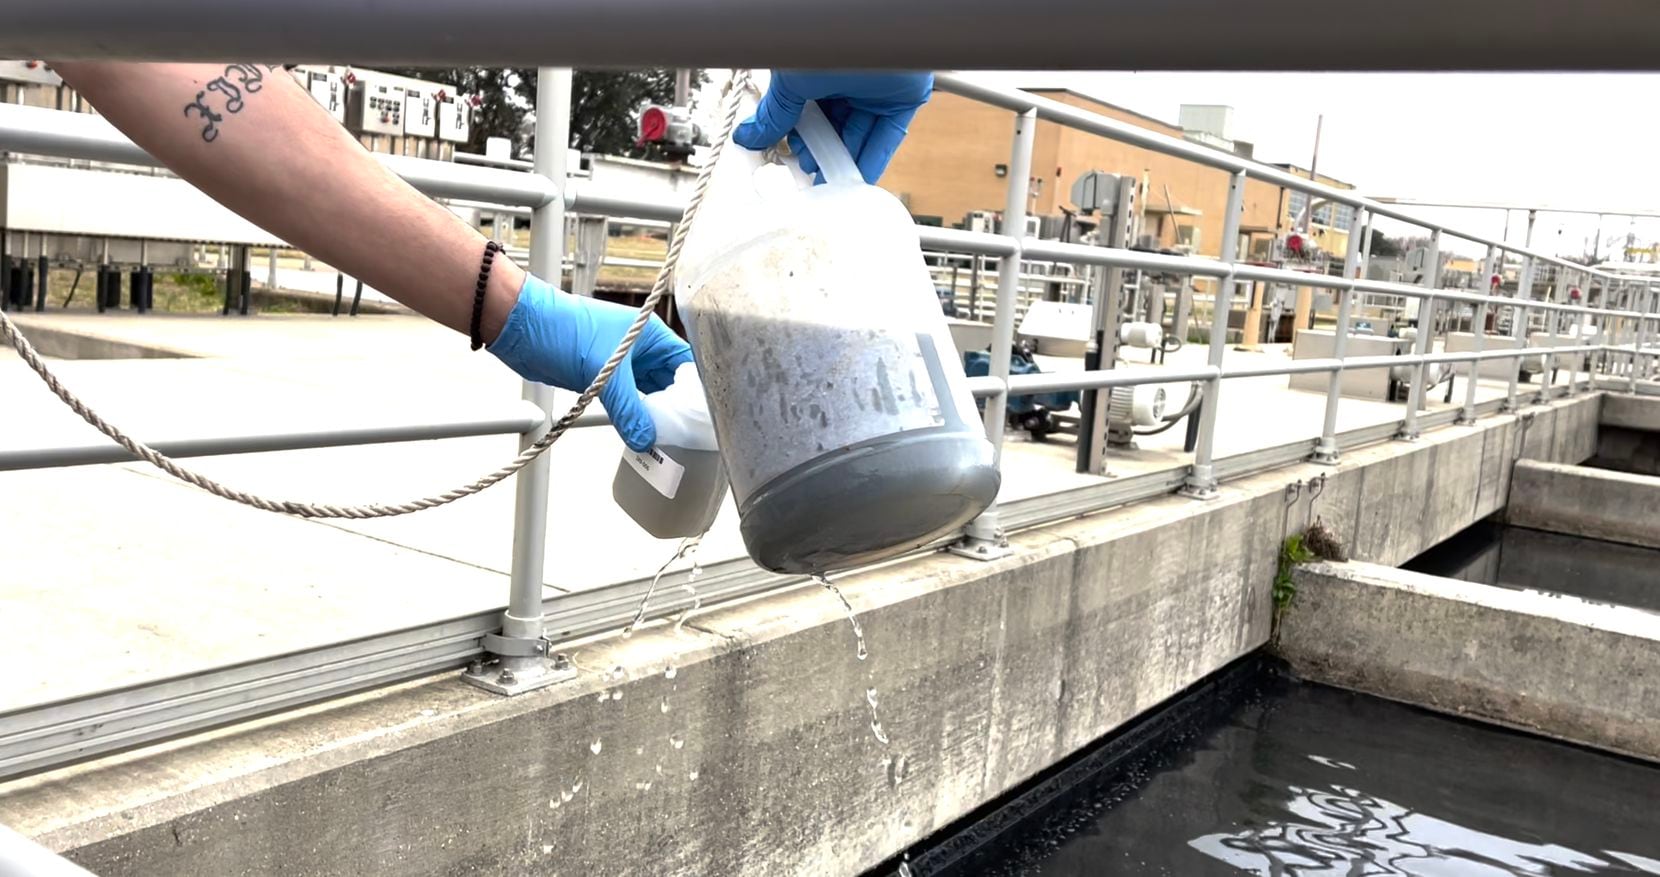 Wastewater sample were collected for COVID-19 testing at the Central Wastewater Treatment...